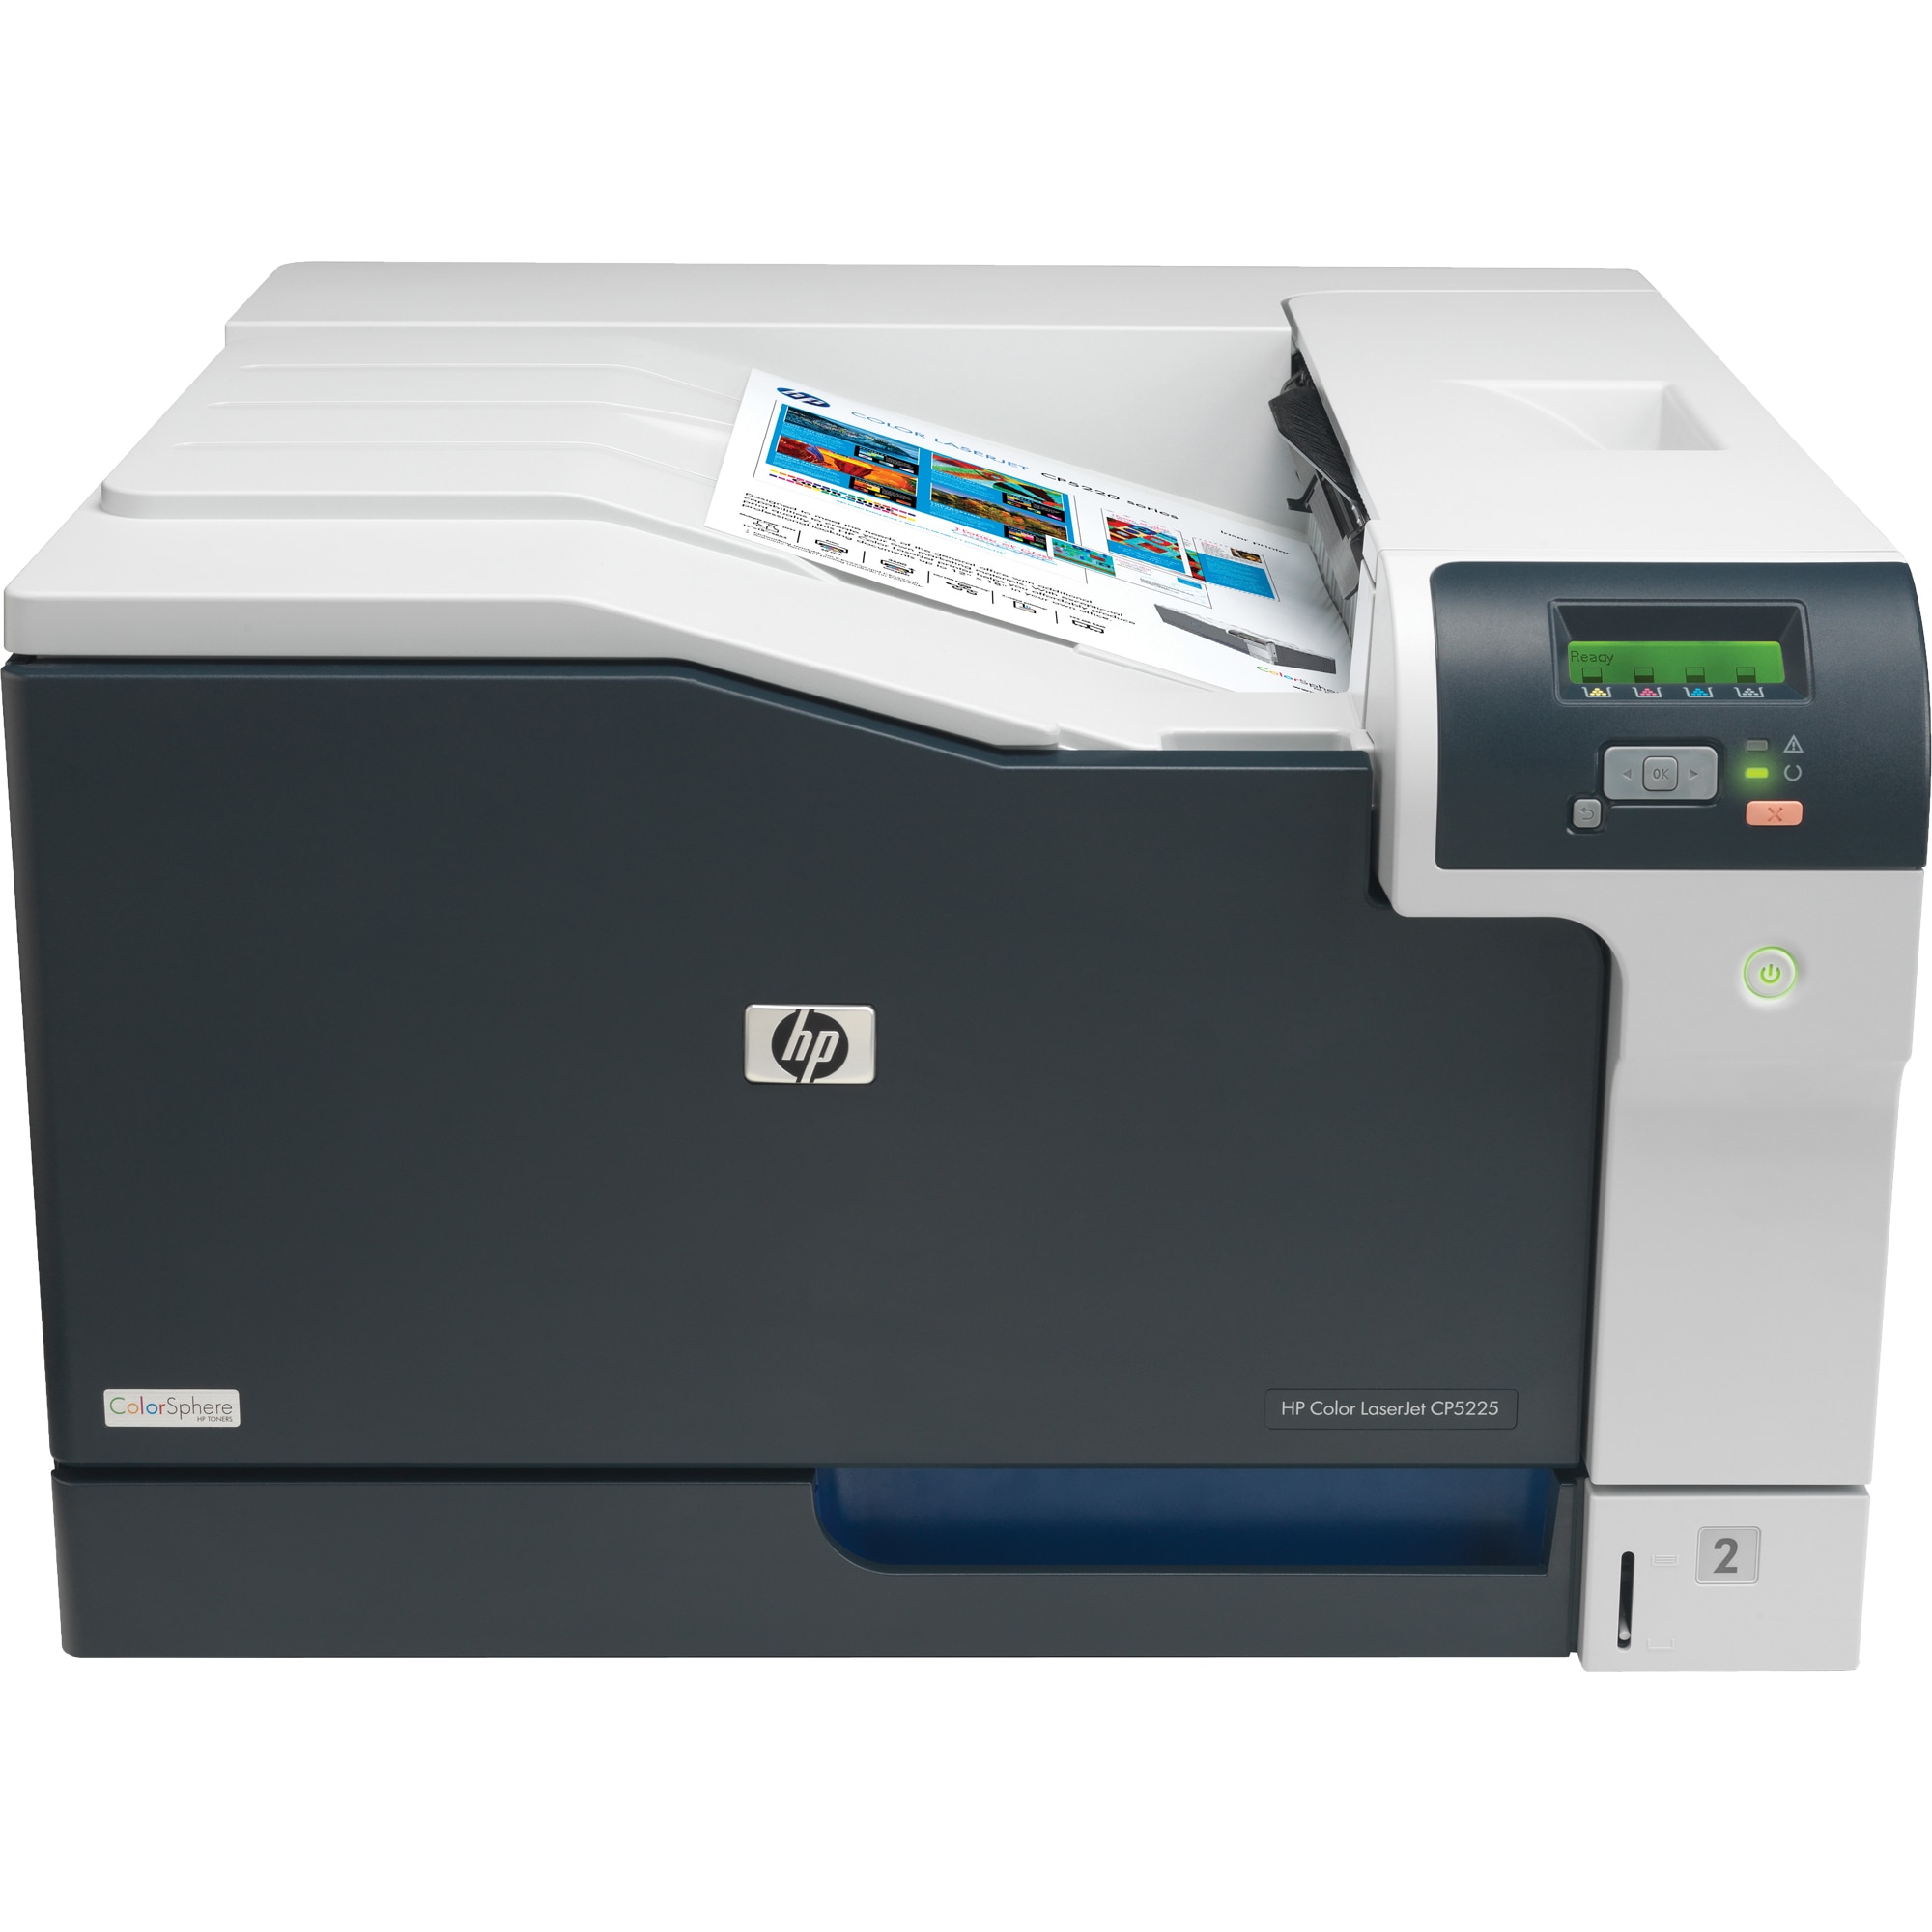 Apartment Royal family thickness Imprimanta laser color HP LaserJet Professional CP5225n, A3 - eMAG.ro